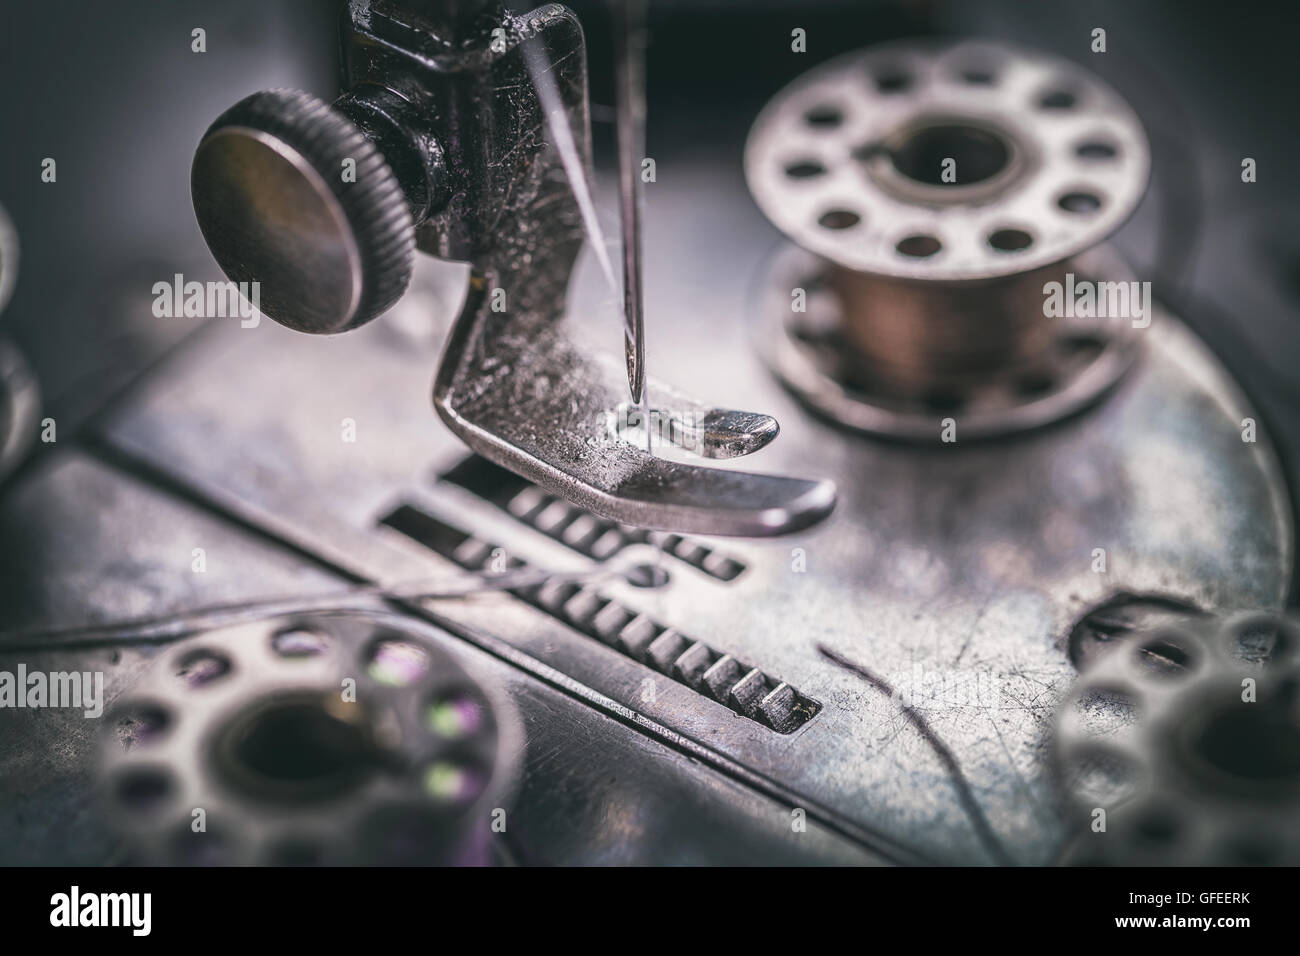 Close up of household sewing machine presser foot Stock Photo